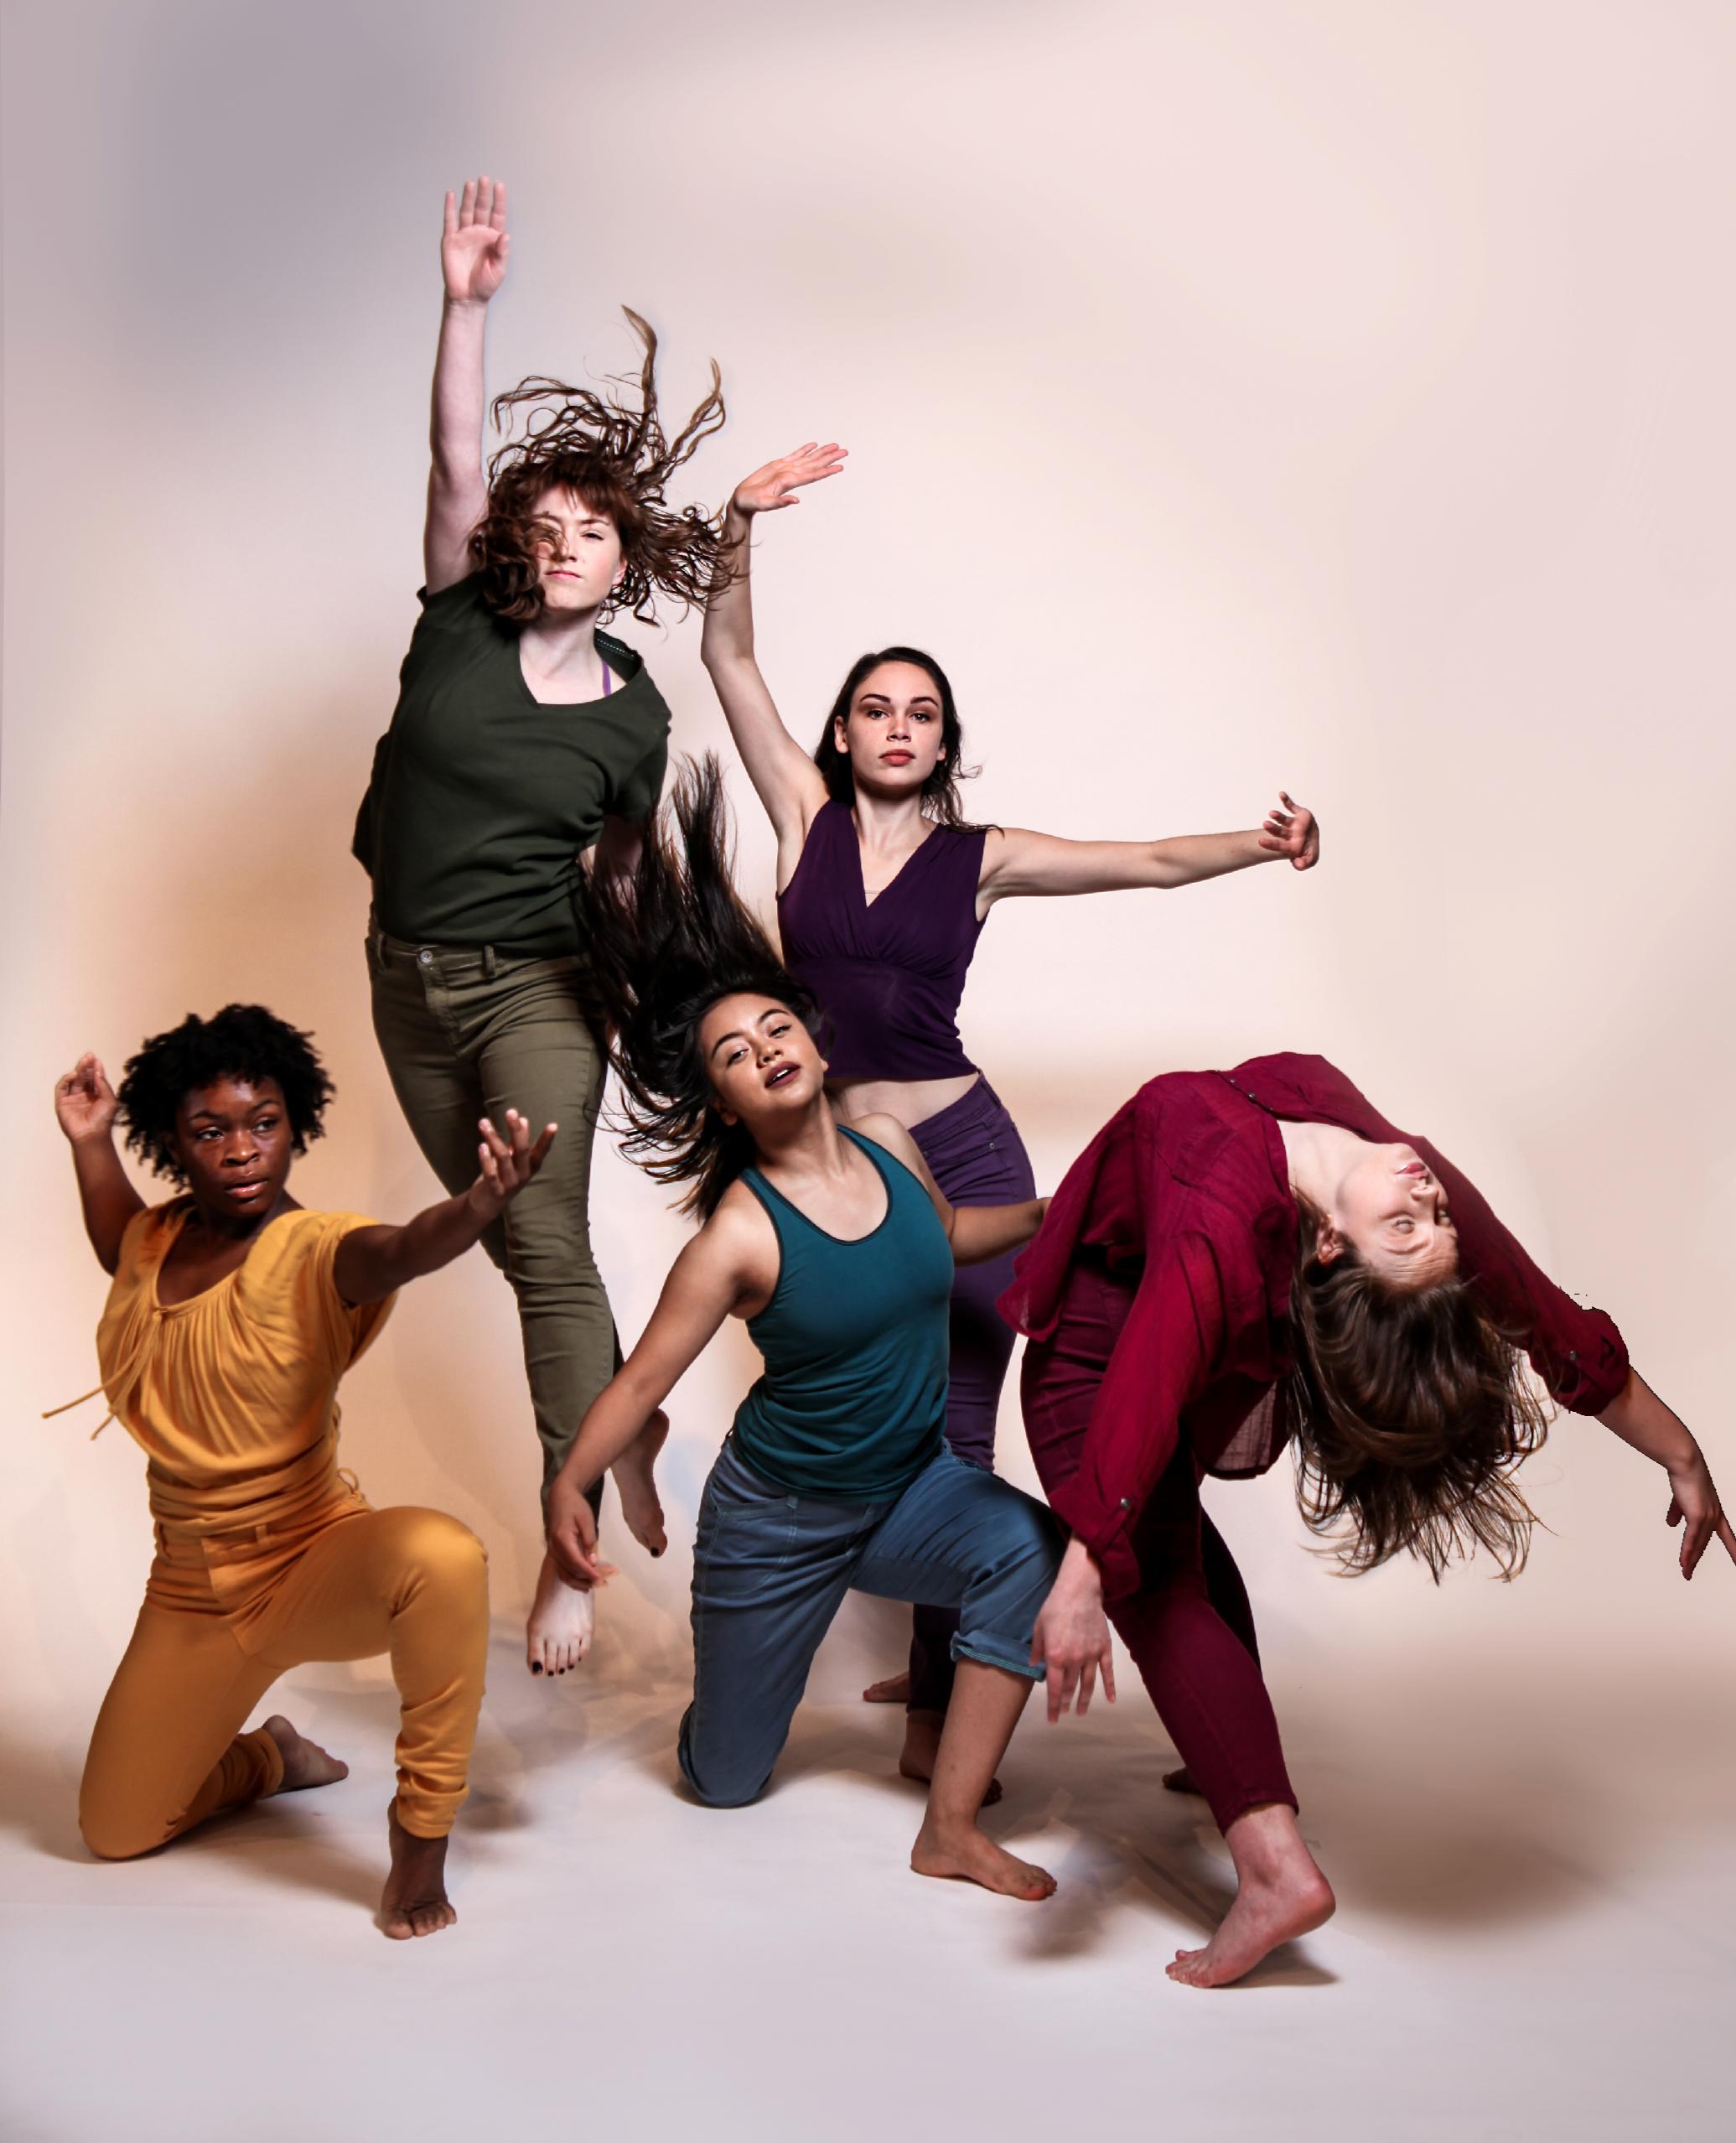 The Department of Theatre Arts and Dance presents "Dance Harvest 2019," the work of our BFA student choreographers and the introduction of our freshman Dance majors. Publicity image courtesy Melissa Dooley Photography.